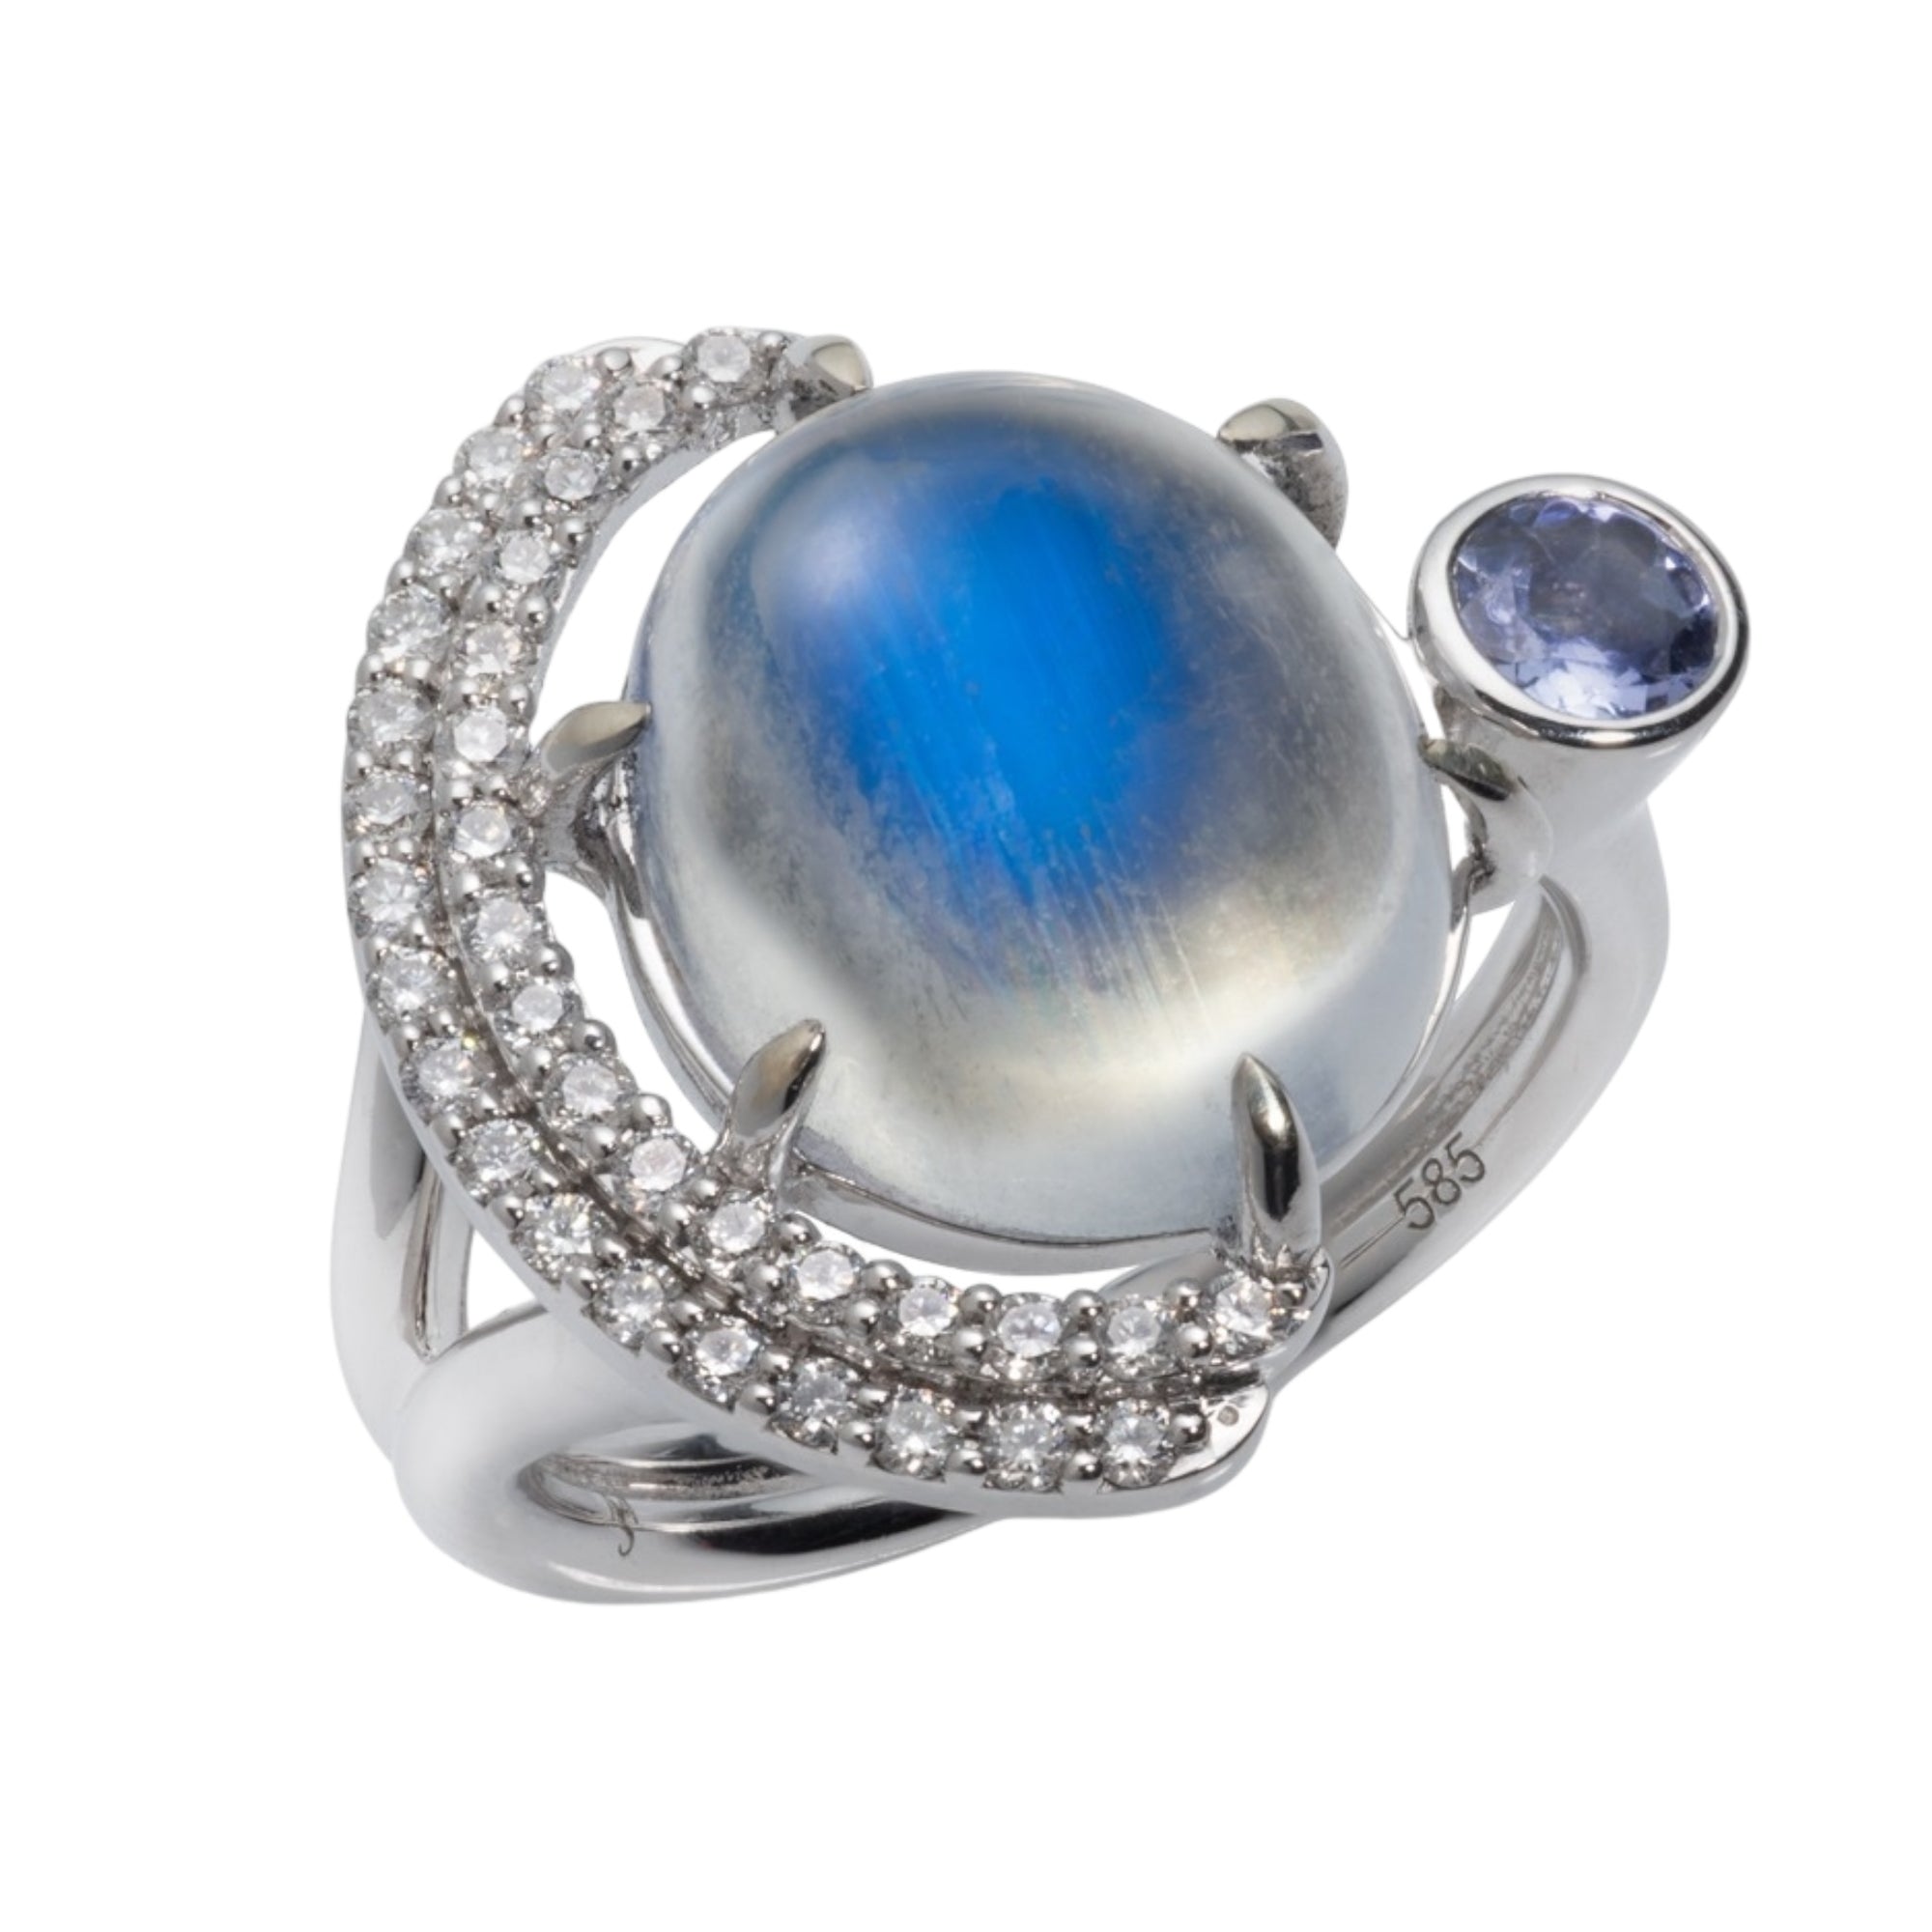 Eclipse Ring with Moonstone, Tanzanite and Diamonds 14k by Martha Seely available at Talisman Collection Fine Jewelers in El Dorado Hills, CA and online. Stats: This extraordinarily special cocktail ring showcases an 8.6 ct. blue moonstone cabochon stone set in 14k white gold. Floating around the &nbsp;Moonstone is 0.33 ct of diamonds and a 4mm pale tanzanite. You can almost see the sky as you gaze into the stone...